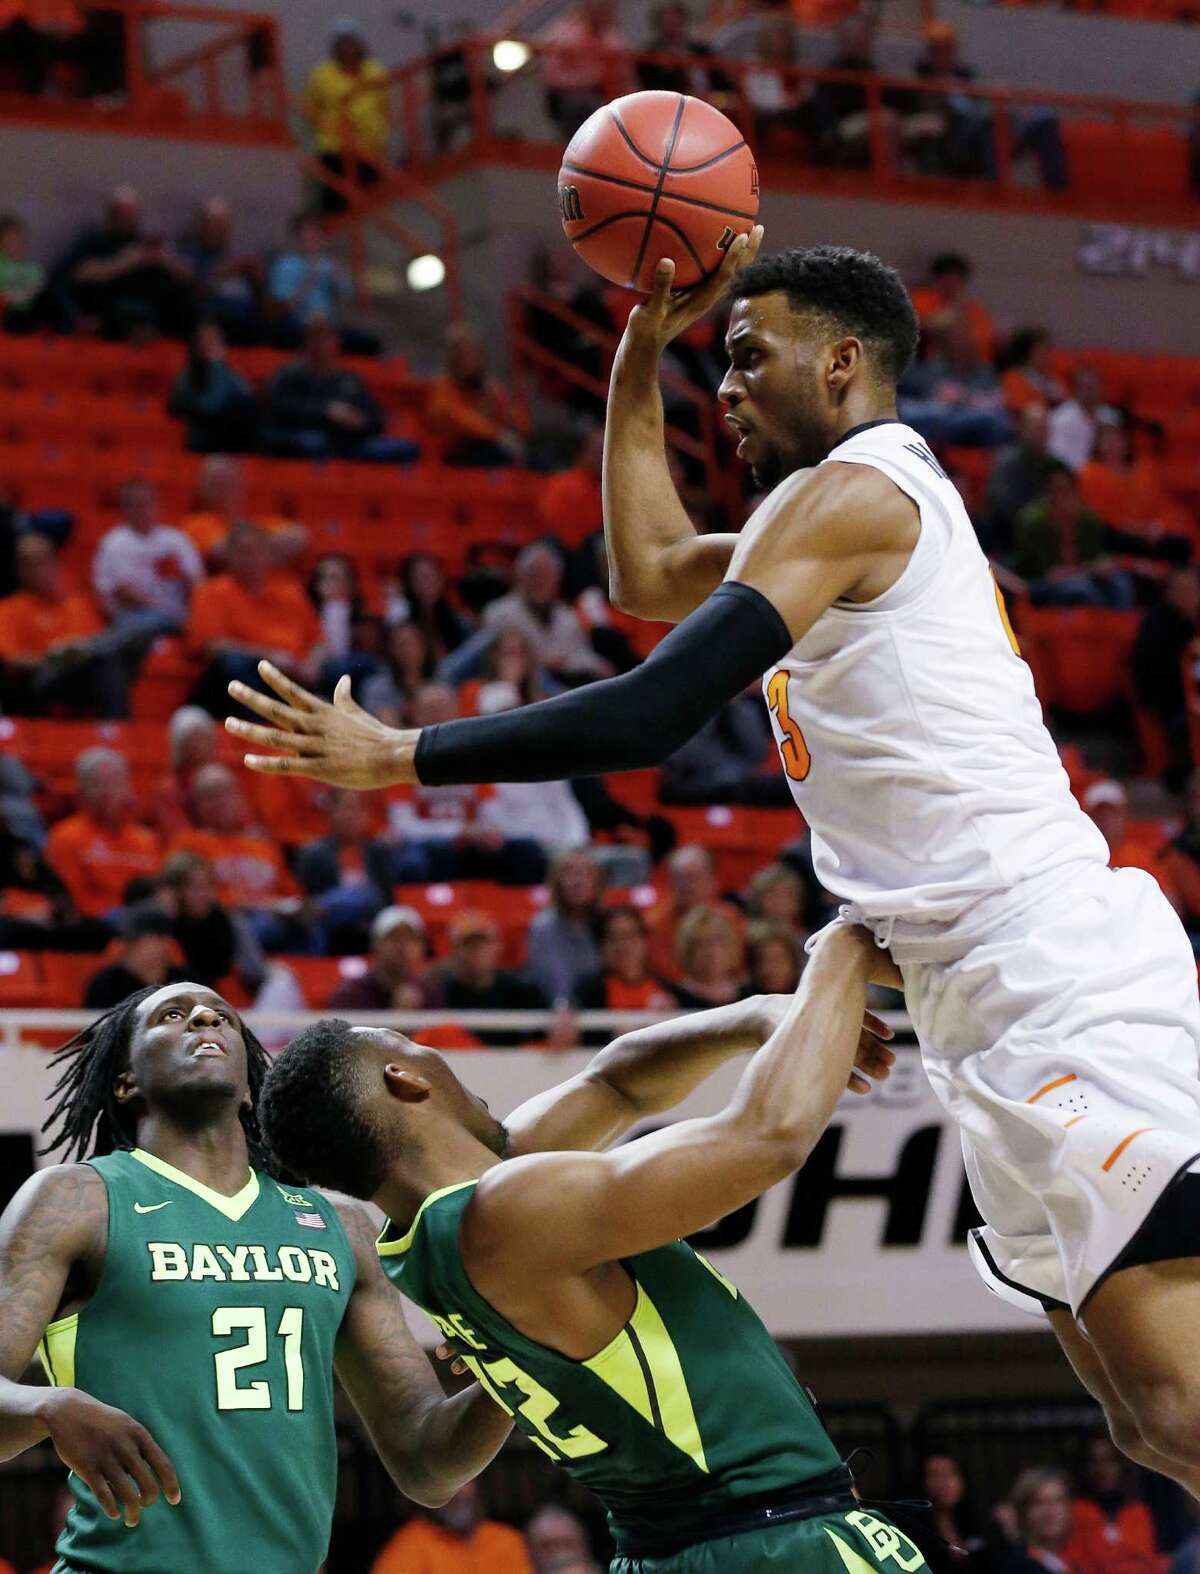 Oklahoma State guard Leyton Hammonds, right, is fouled by Baylor guard King McClure, center, as he shoots during the first half of an NCAA college basketball game in Stillwater, Okla., Wednesday, Jan. 27, 2016. Baylor forward Taurean Prince is at left. (AP Photo/Sue Ogrocki)